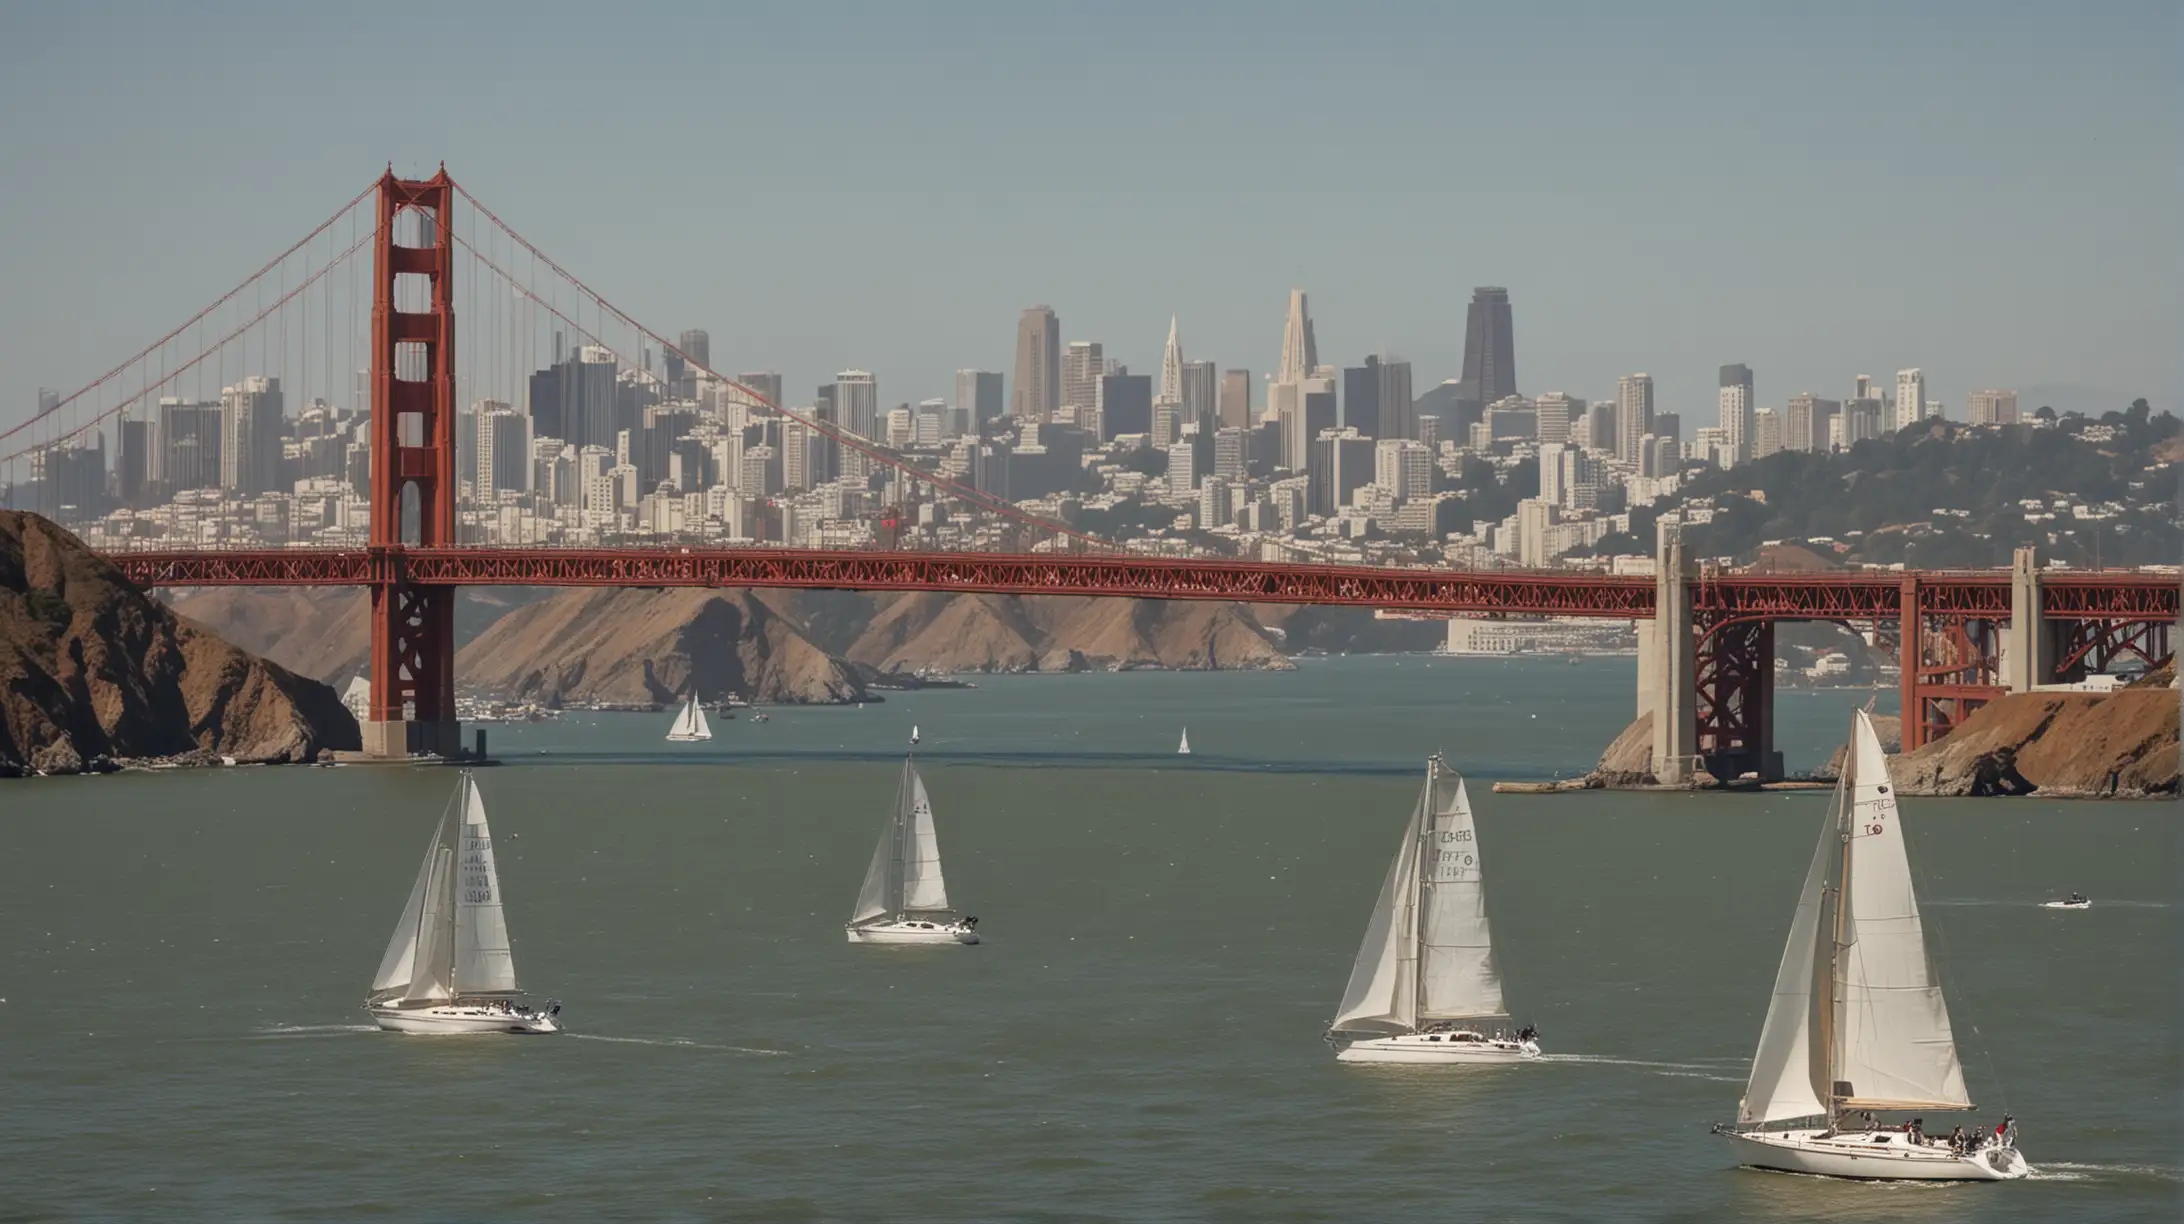 Golden Gate Bridge Overlooking San Francisco Bay with High Rises and Yacht on a Sunny Summer Day